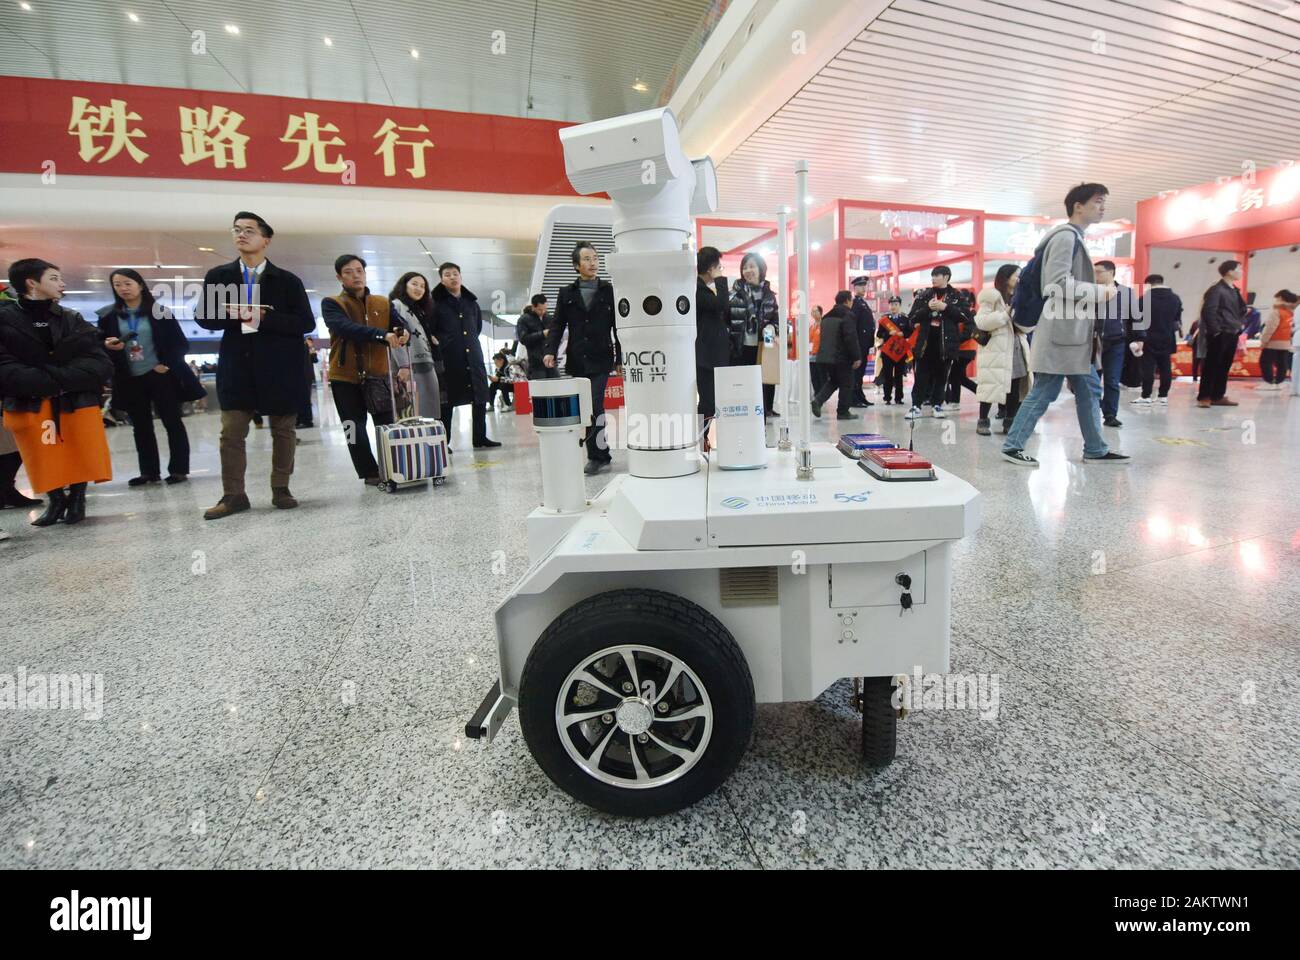 A police robot powered by the 5G wireless service of China Mobile patrols the East Hangzhou Railway Station during the annual Spring Festival travel r Stock Photo